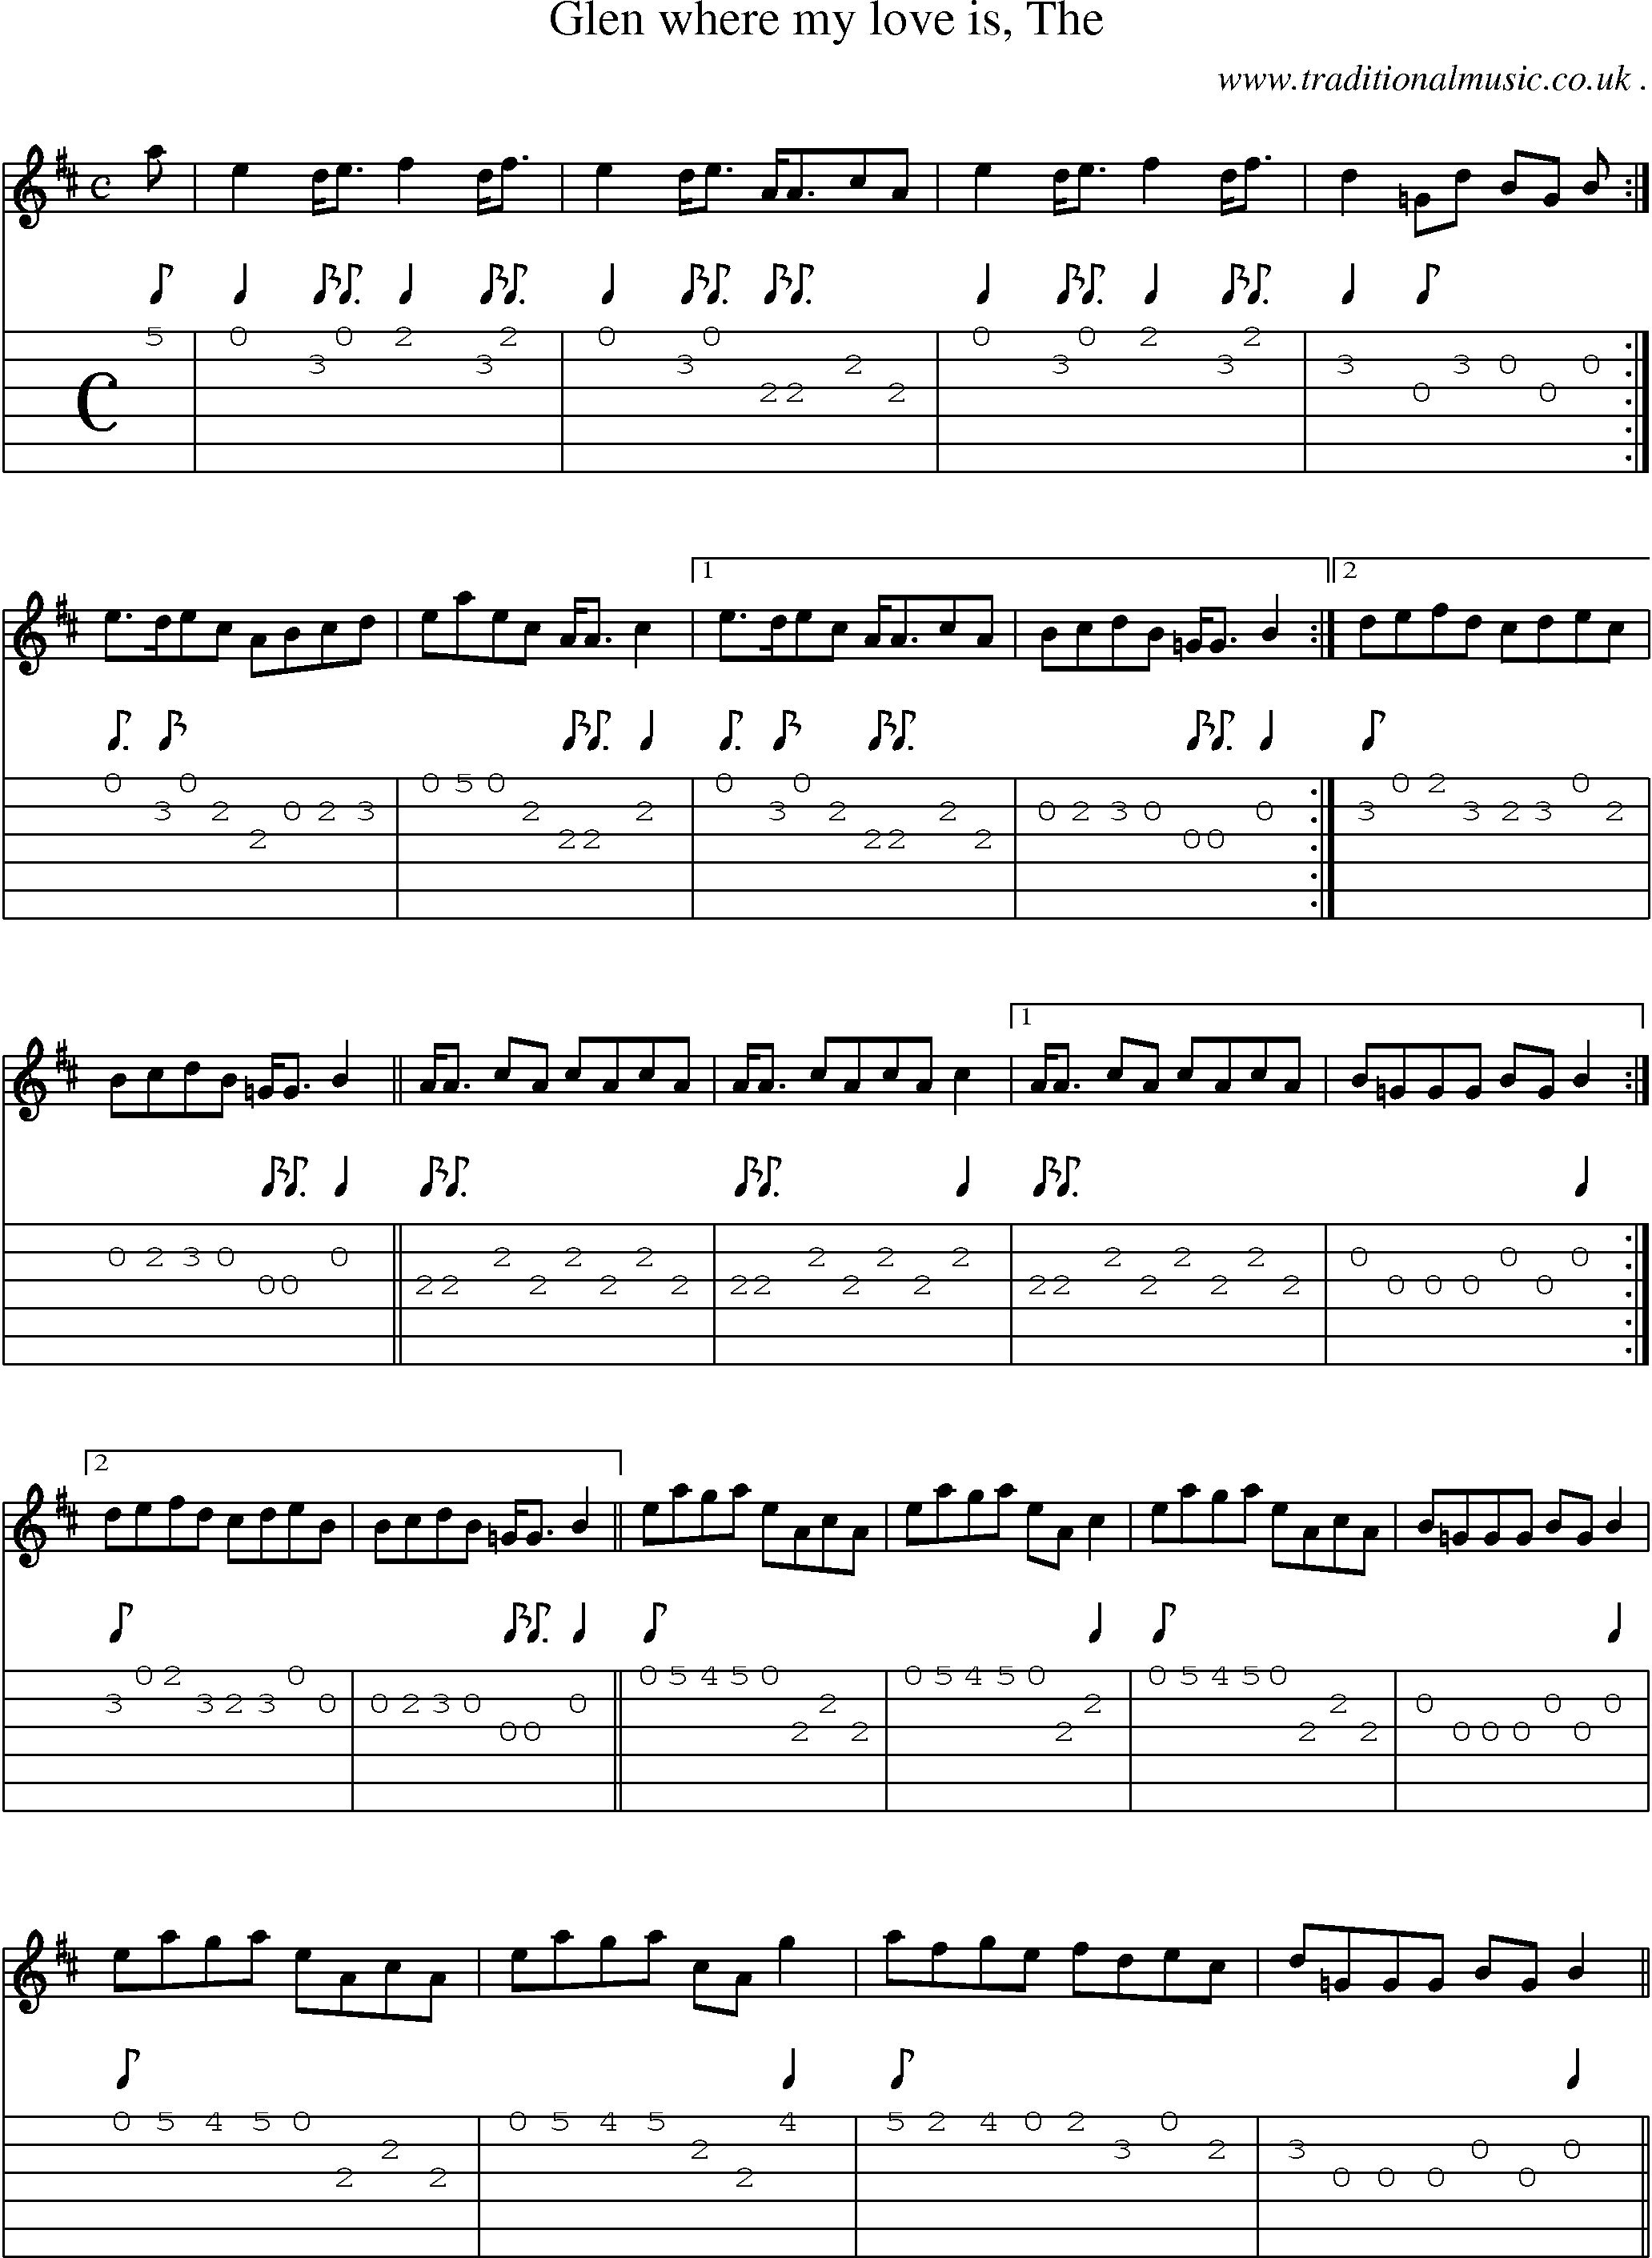 Sheet-music  score, Chords and Guitar Tabs for Glen Where My Love Is The